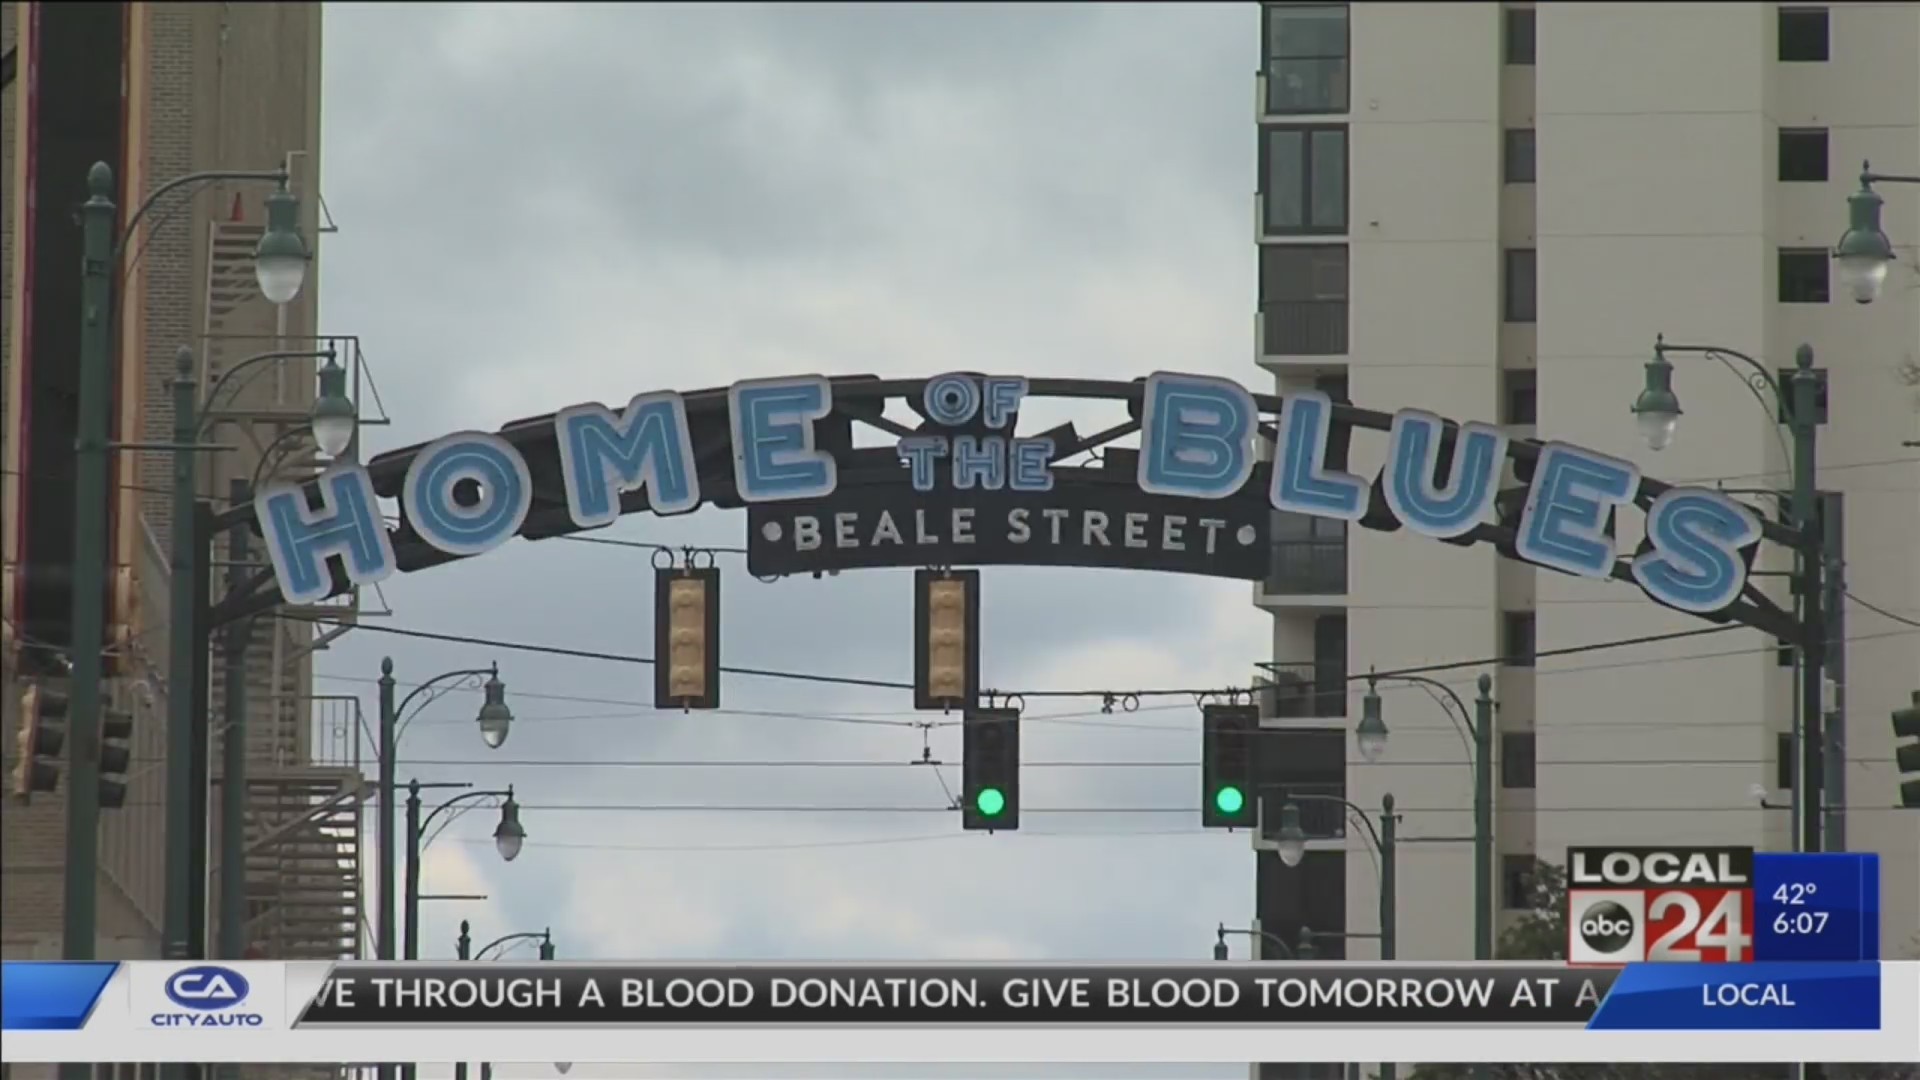 Two more Memphis landmarks added to U.S. Civil Rights Trail